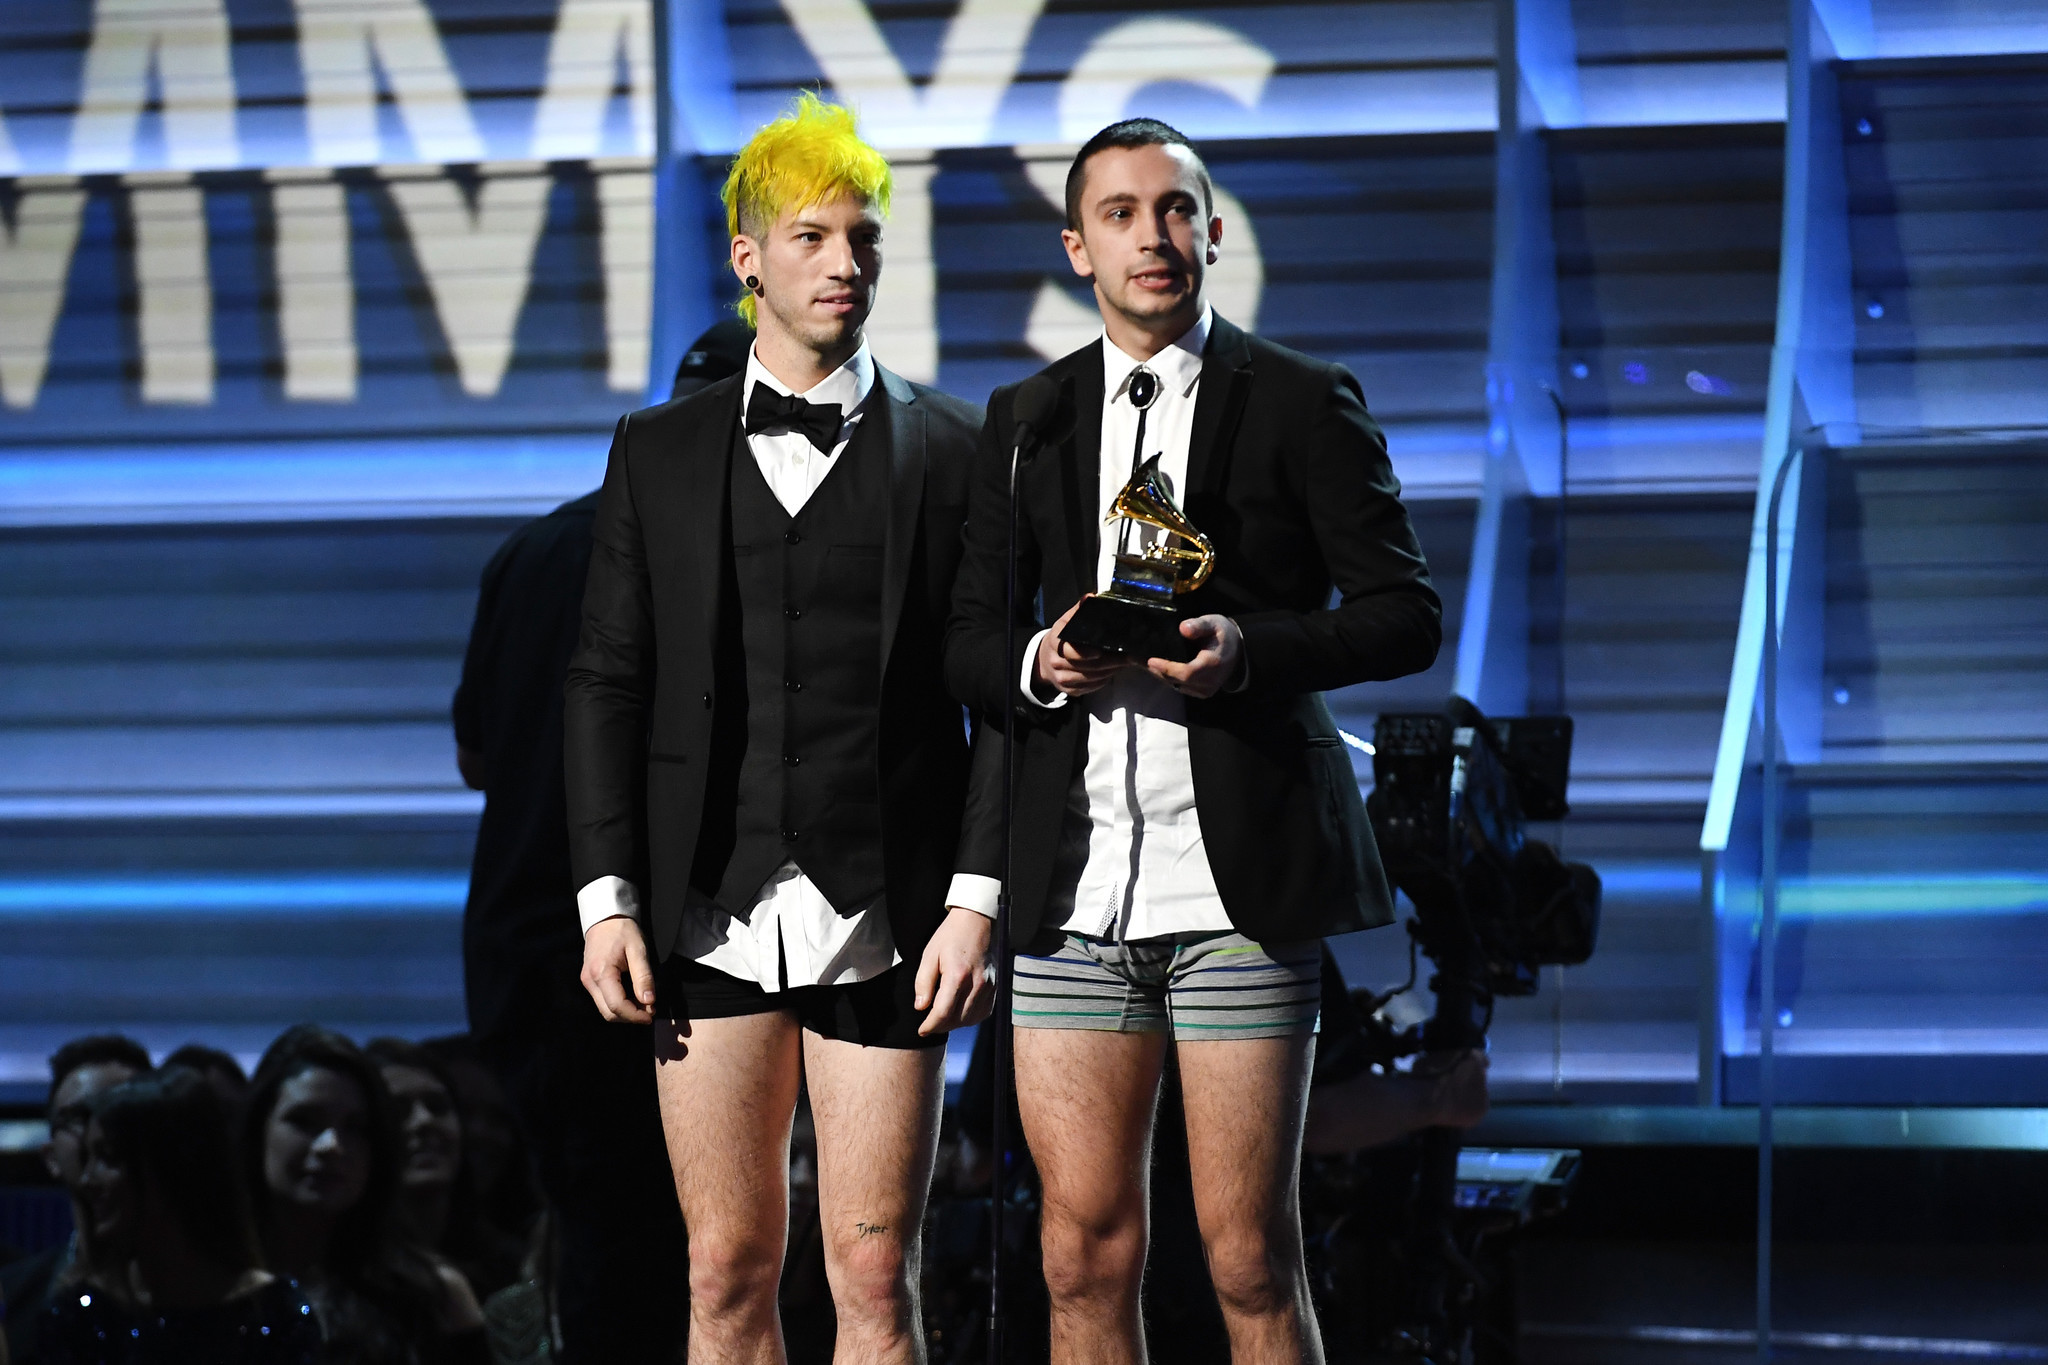 Why did Twenty One Pilots take off their pants? They turned back time, to the good old ...